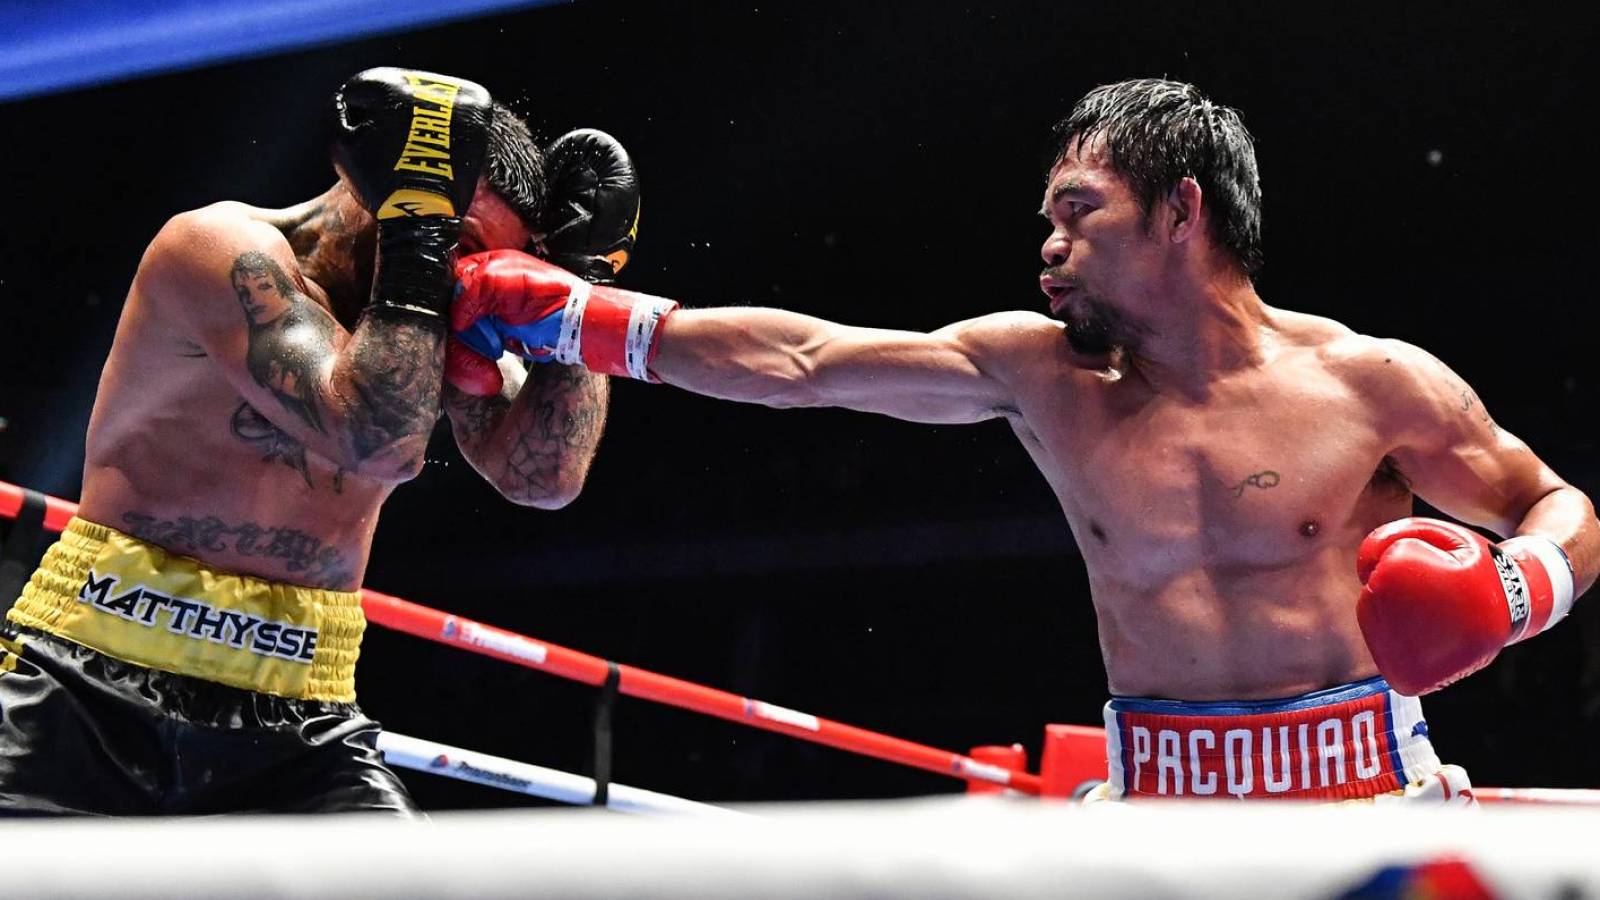 Manny Pacquiao interested in rematch vs. Floyd Mayweather